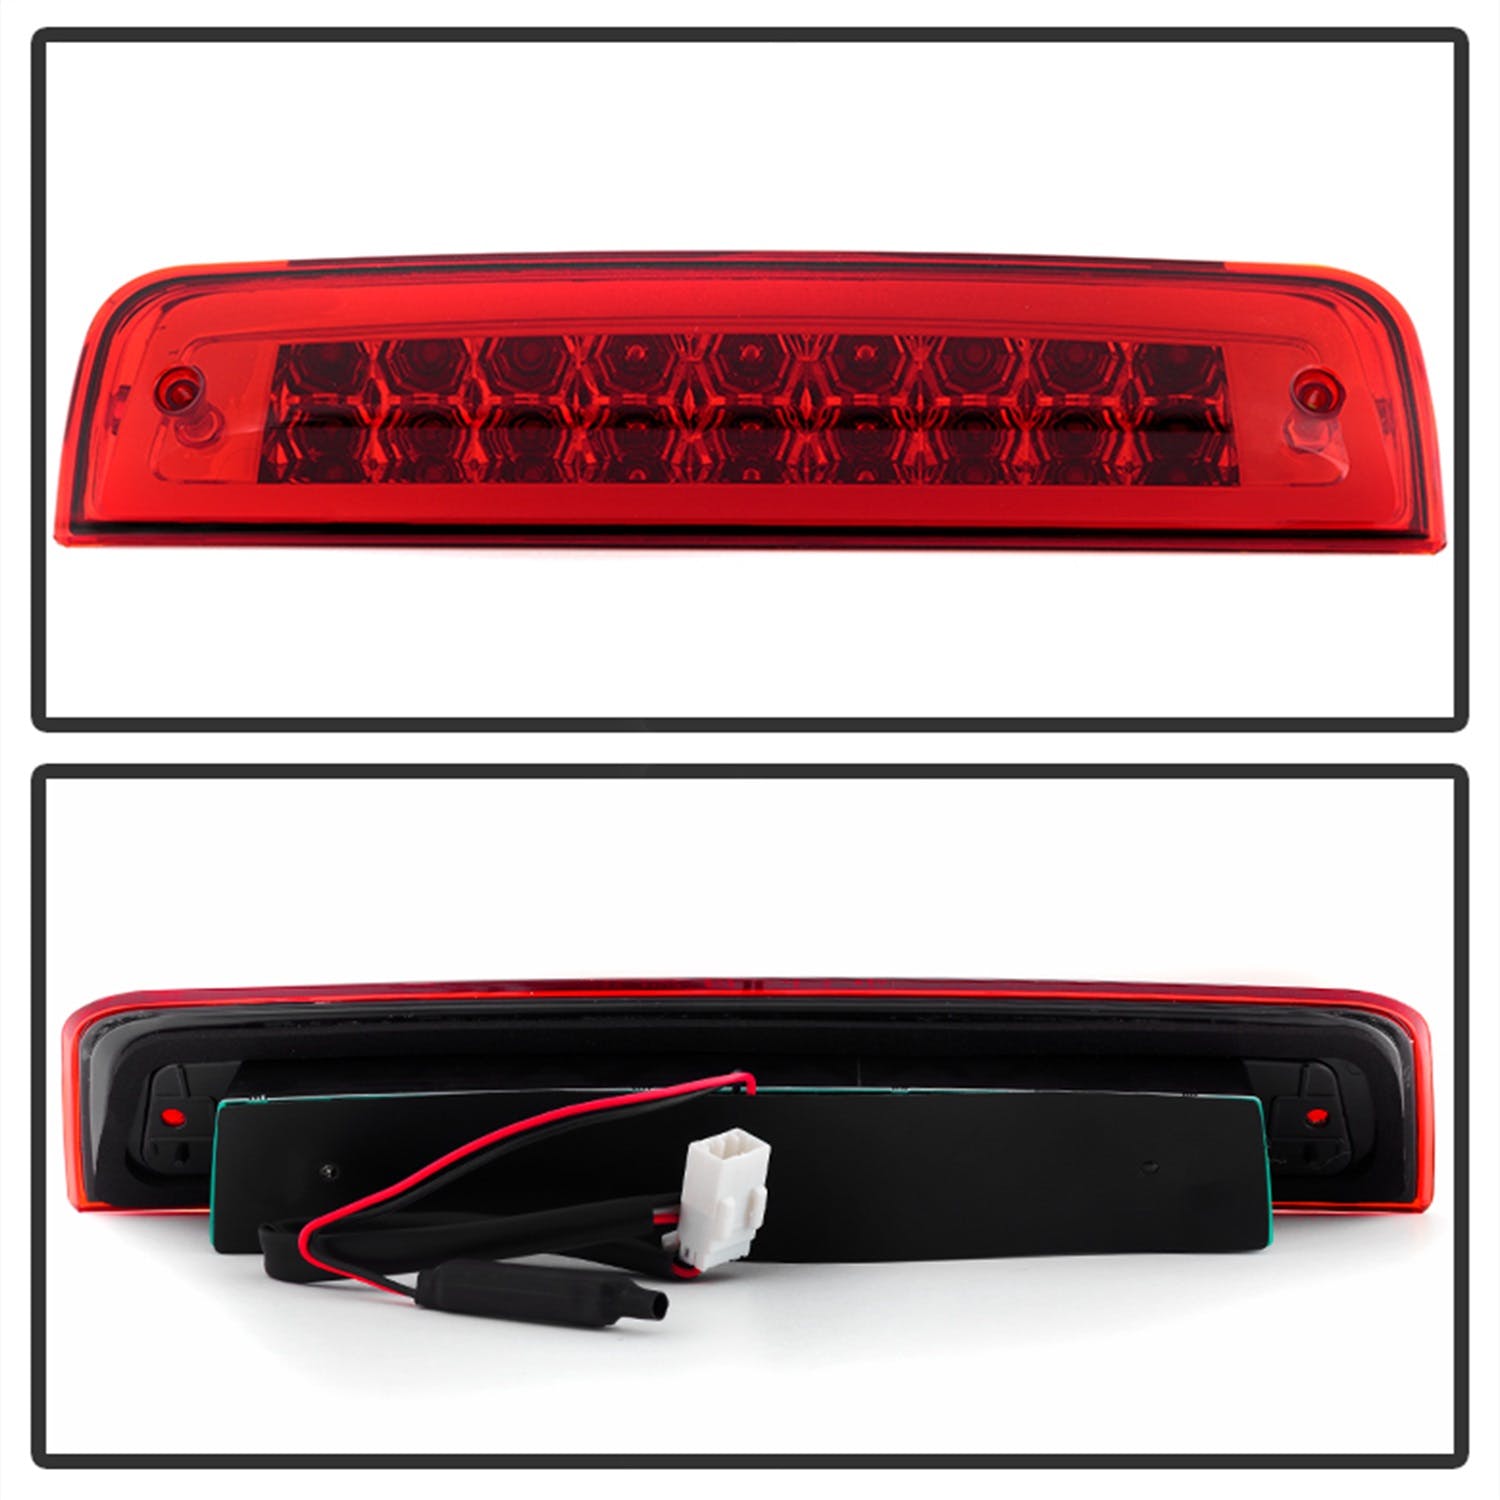 XTUNE POWER 9036330 Dodge Ram 1500 09 15 2500 3500 10 16 (not compatible with backup camera on 3rd brake light) LED 3RD Brake Light Red